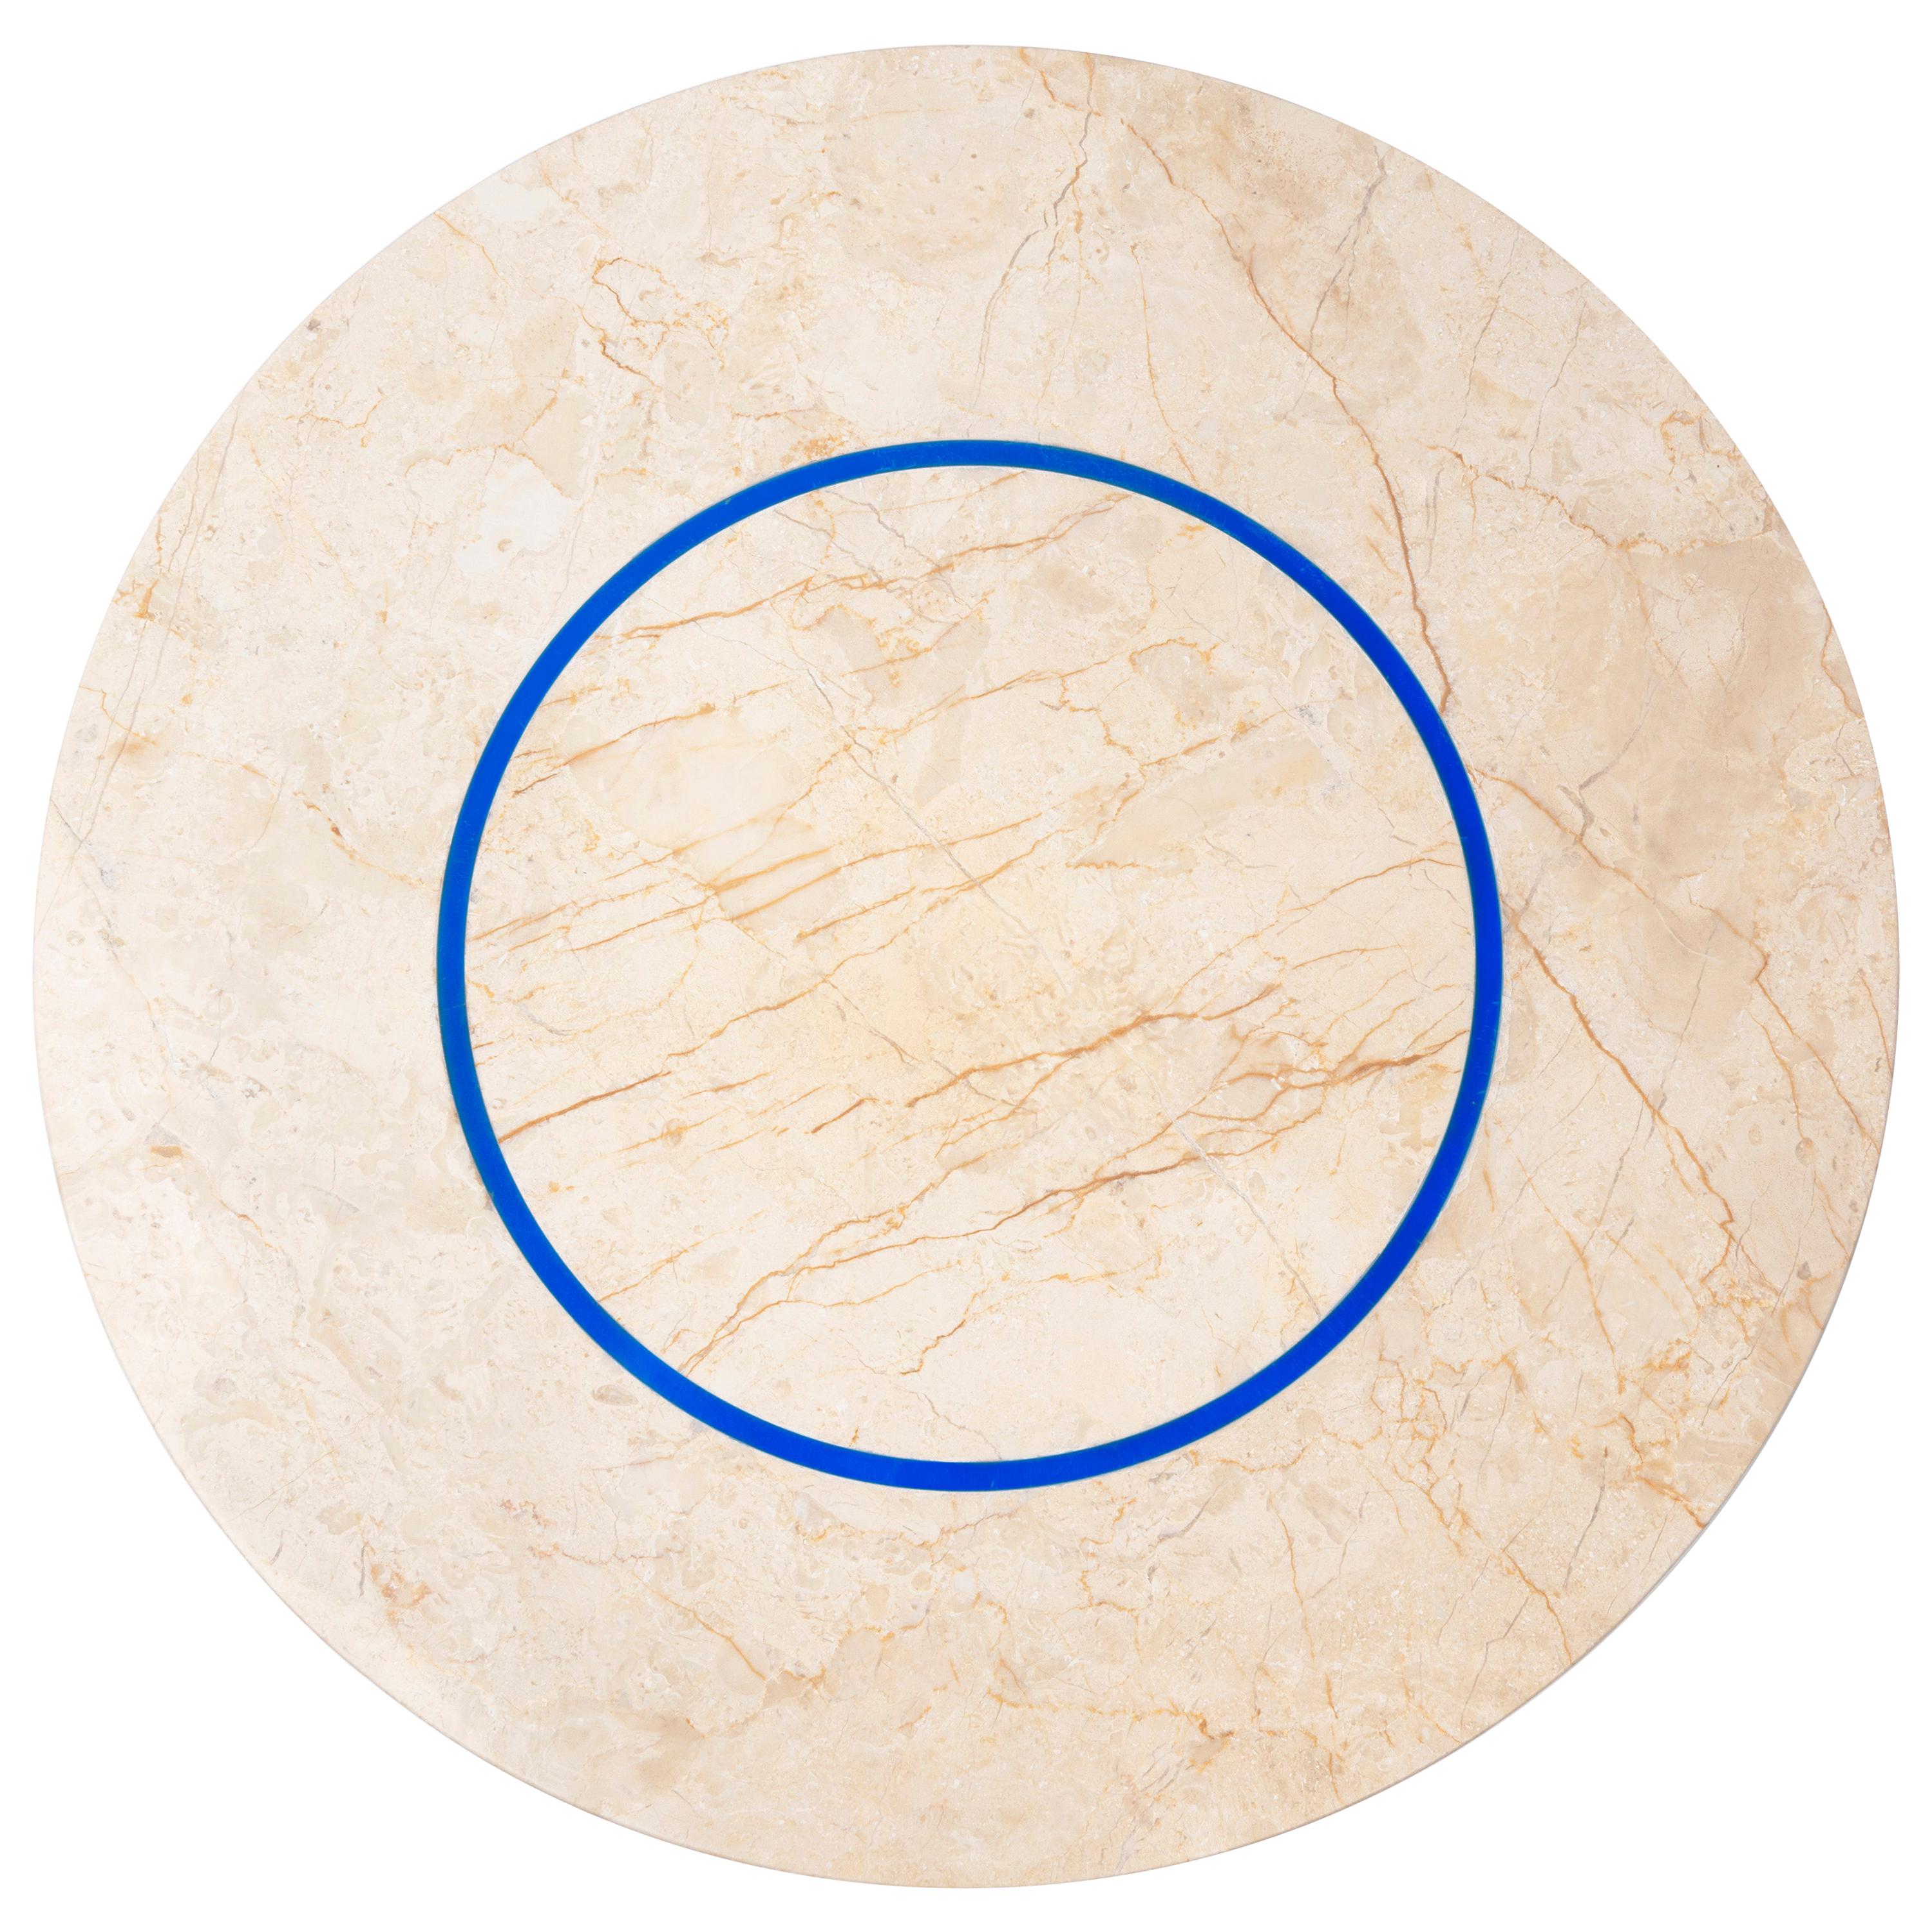 Buzao released the 2020 new collection, dislocation, which consisted of a round marble coffee table and two marble side tables. The usage of blue industrial materials dislocates the marble’s natural texture. The collection comes in Menes gold and